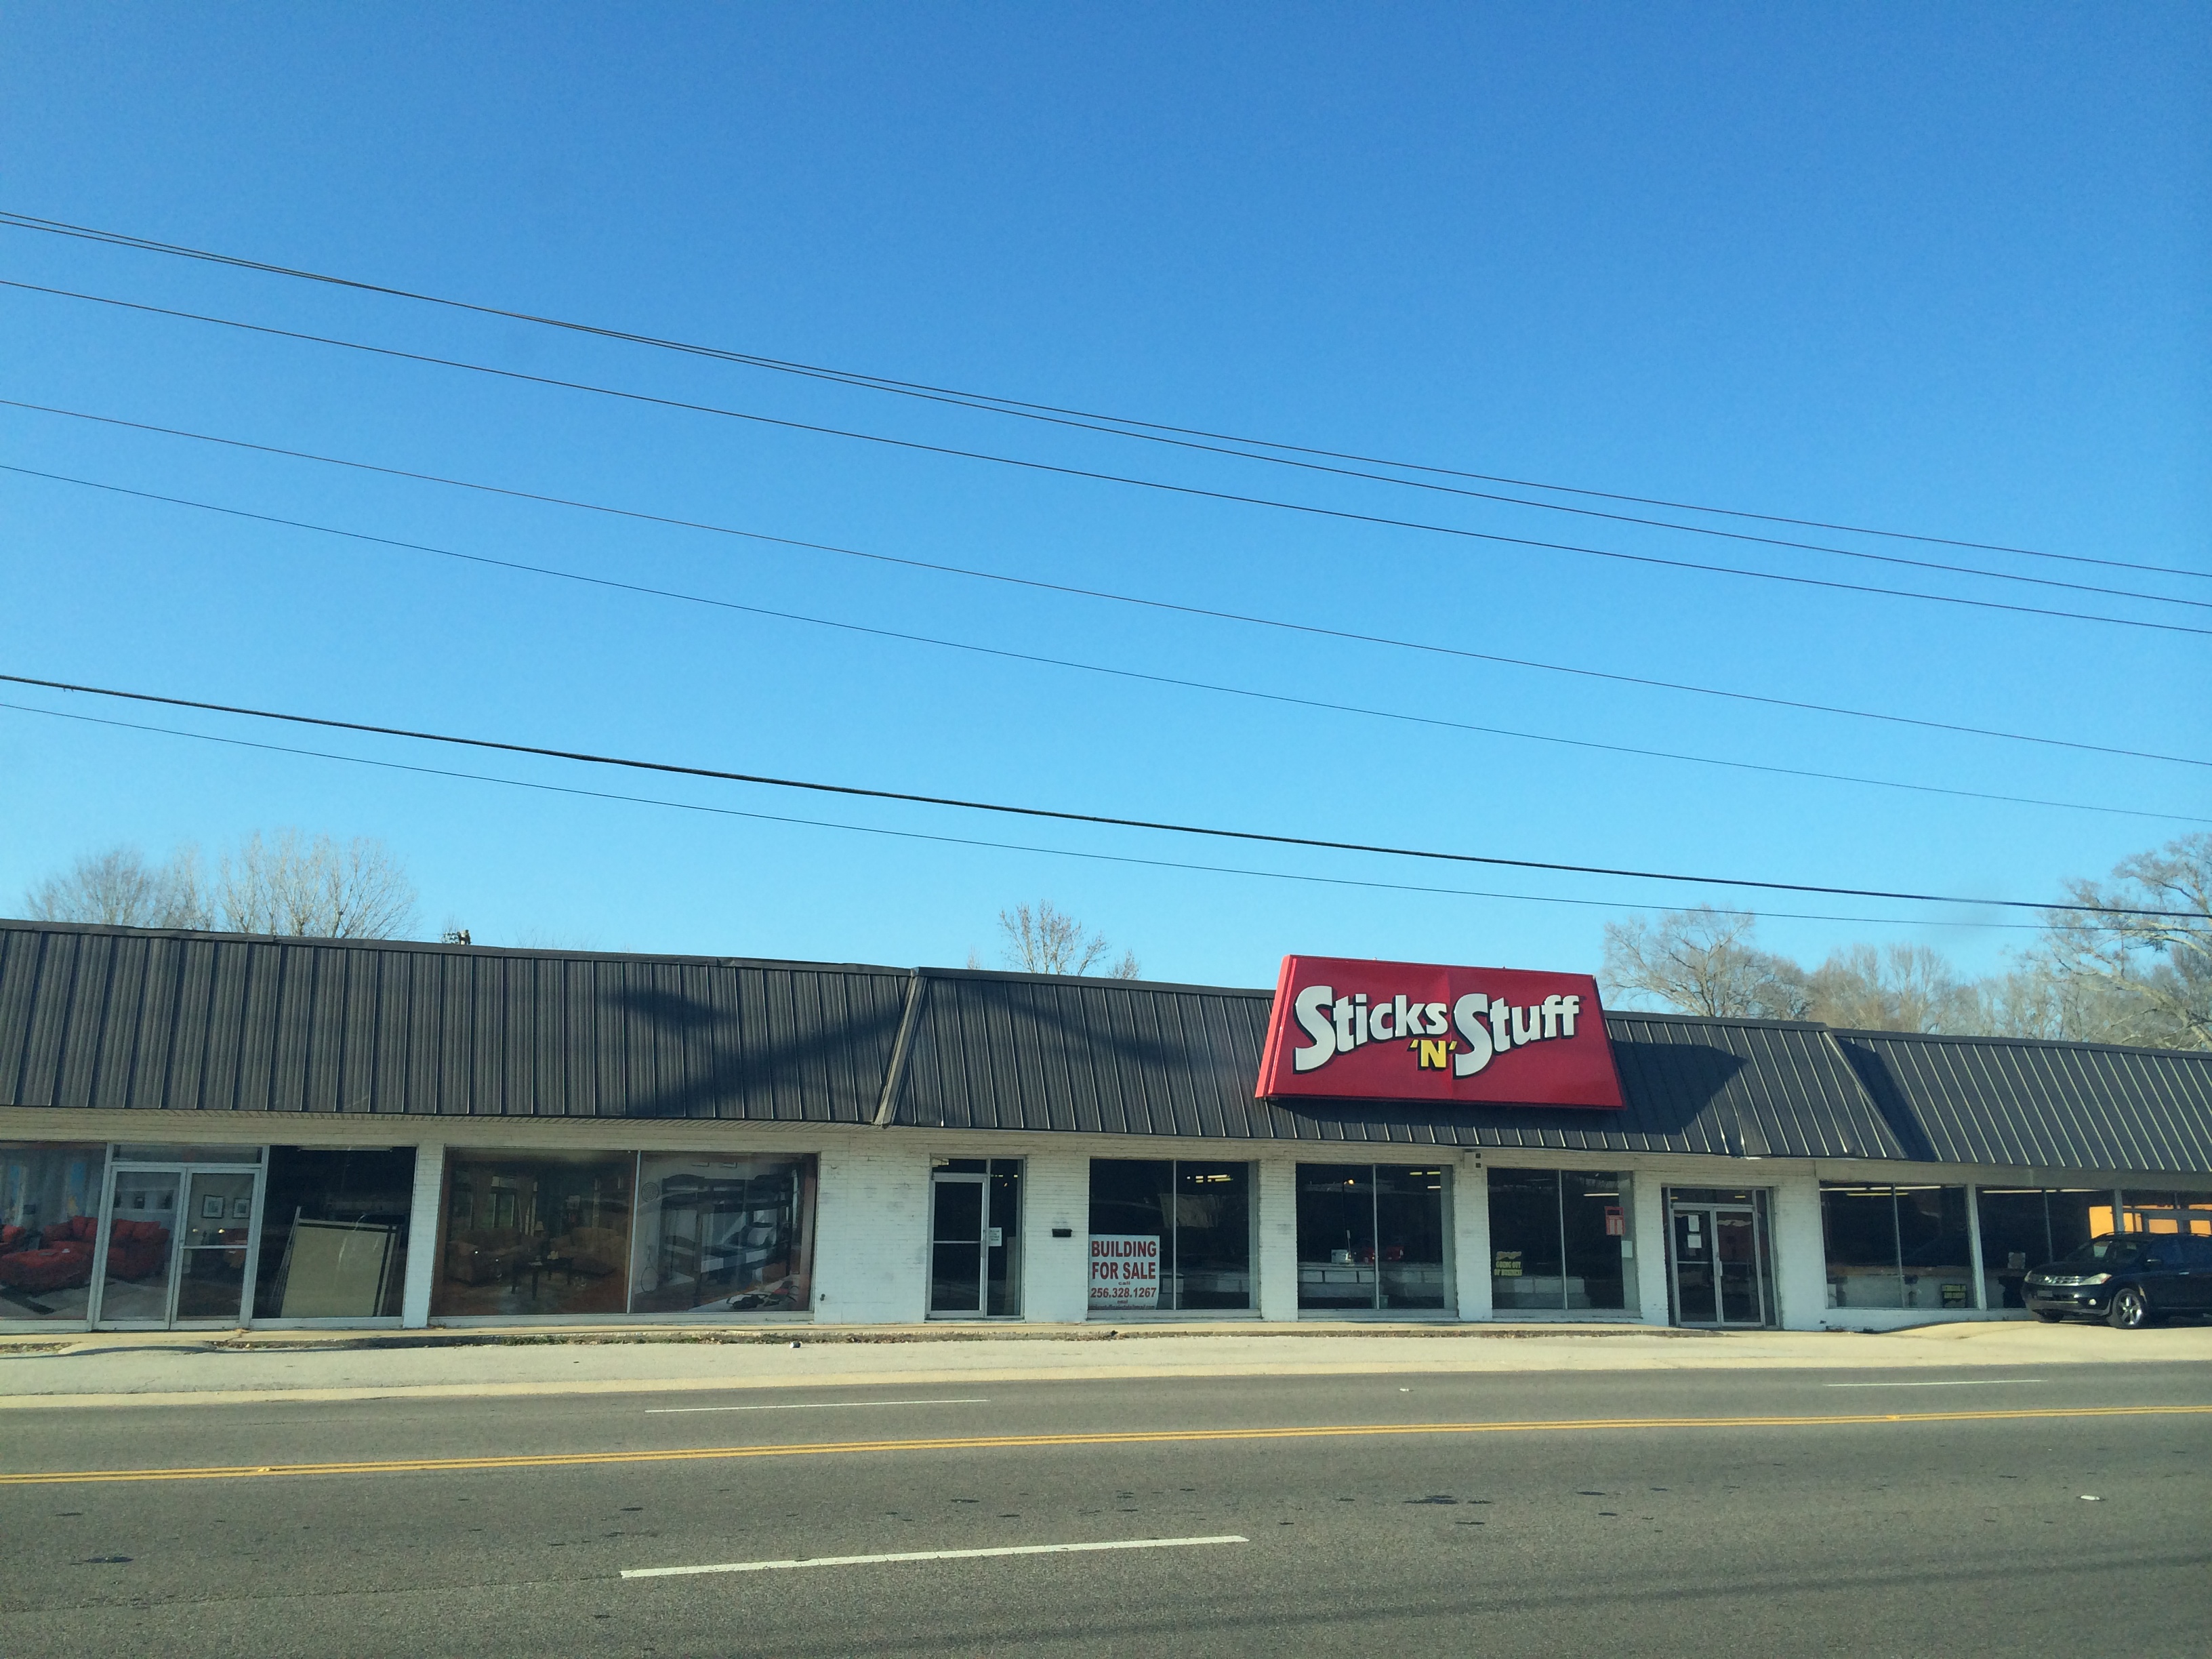 Trussville to acquire former Sticks ‘N’ Stuff building